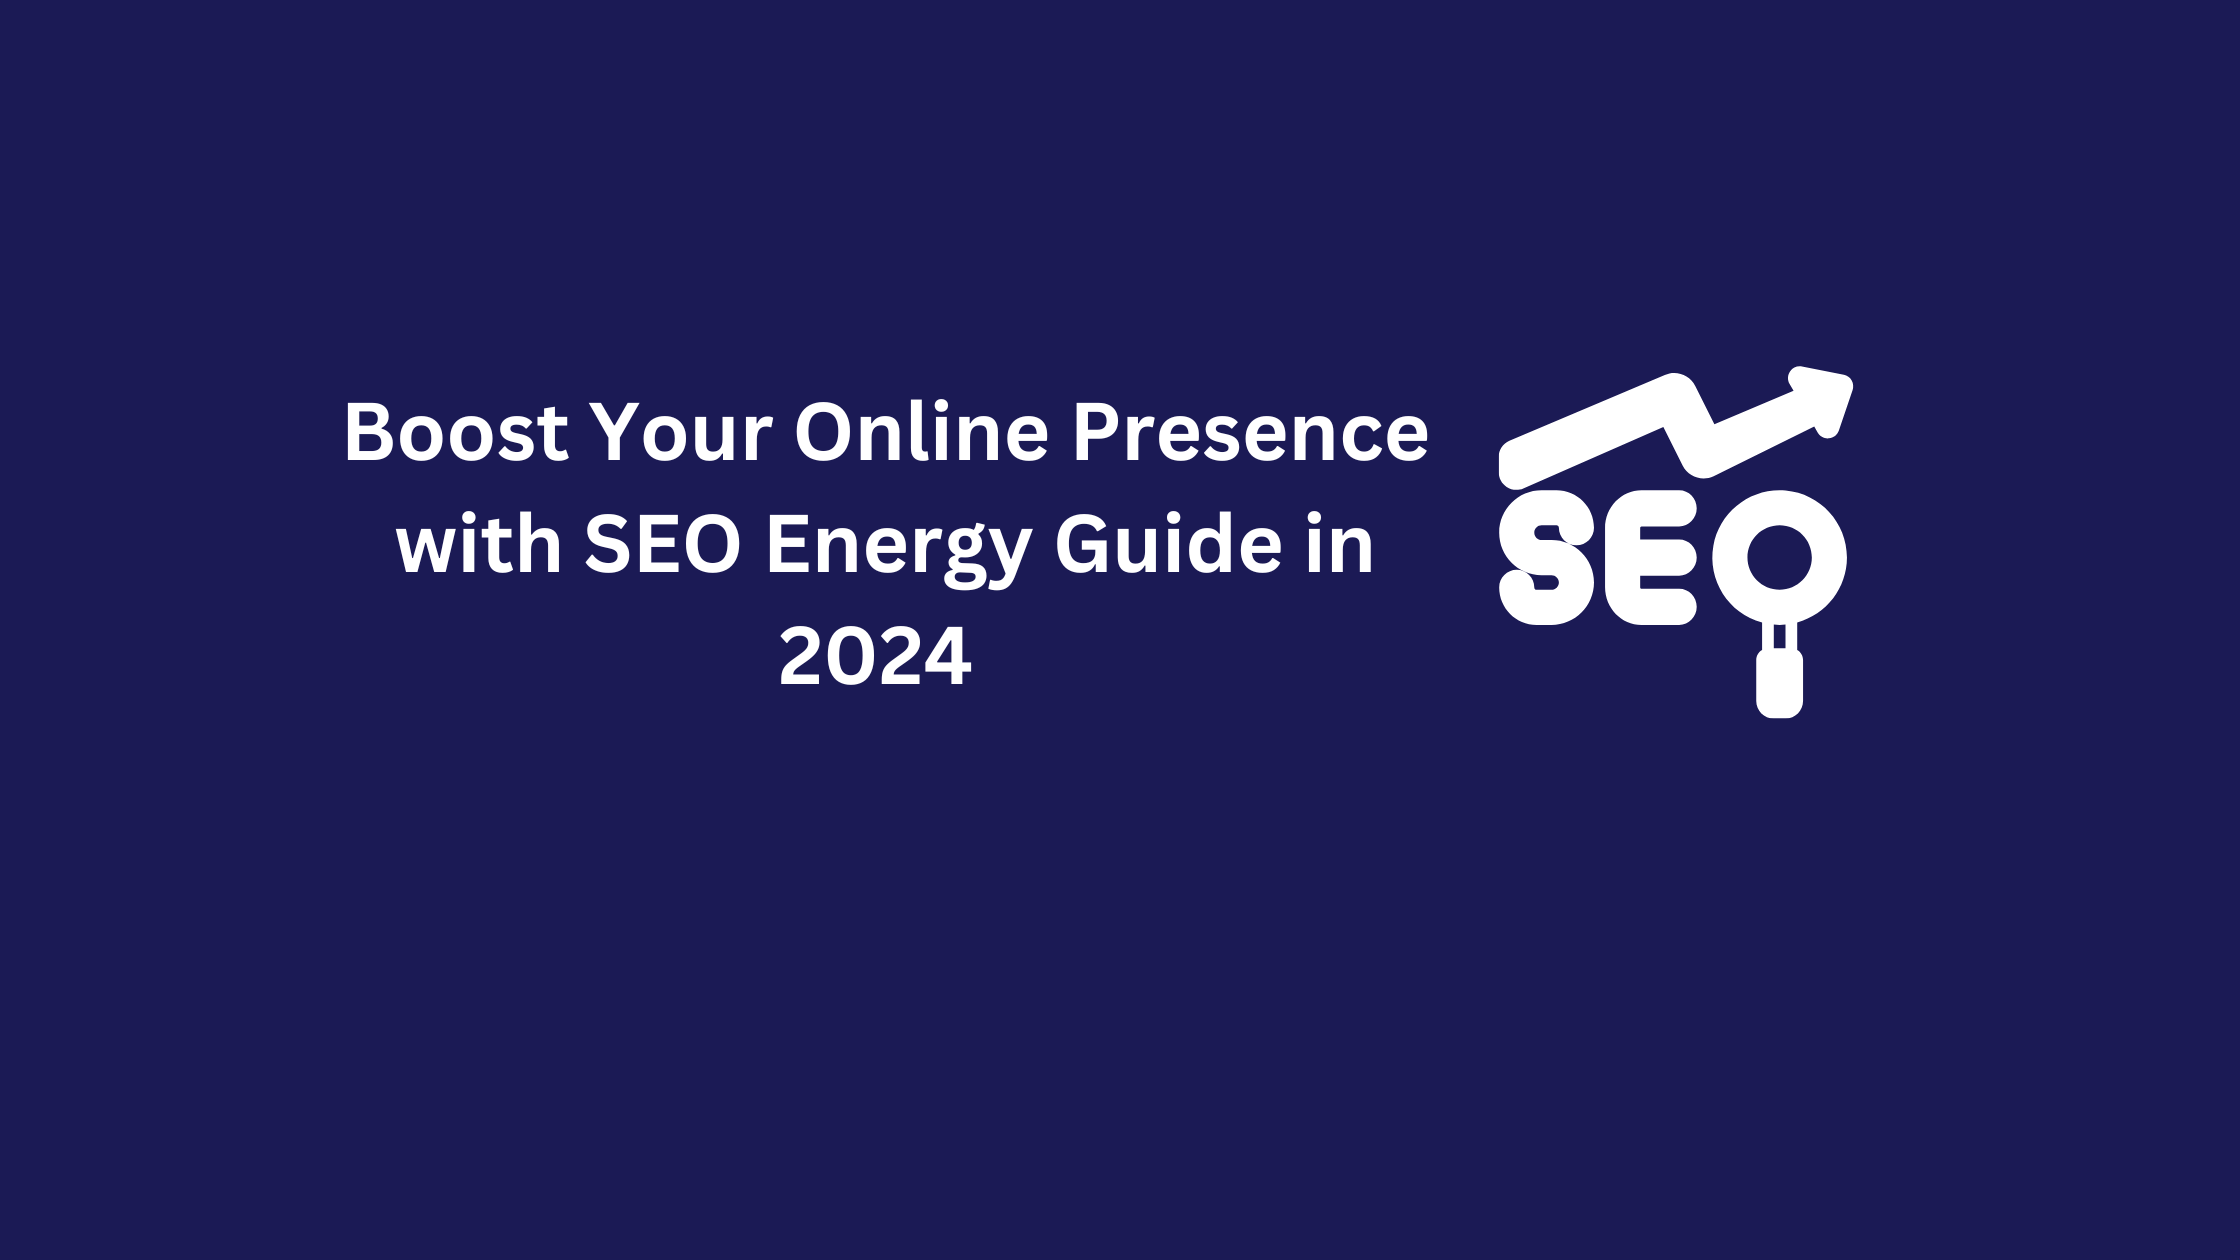 Boost Your Online Presence with SEO Energy Guide in 2024